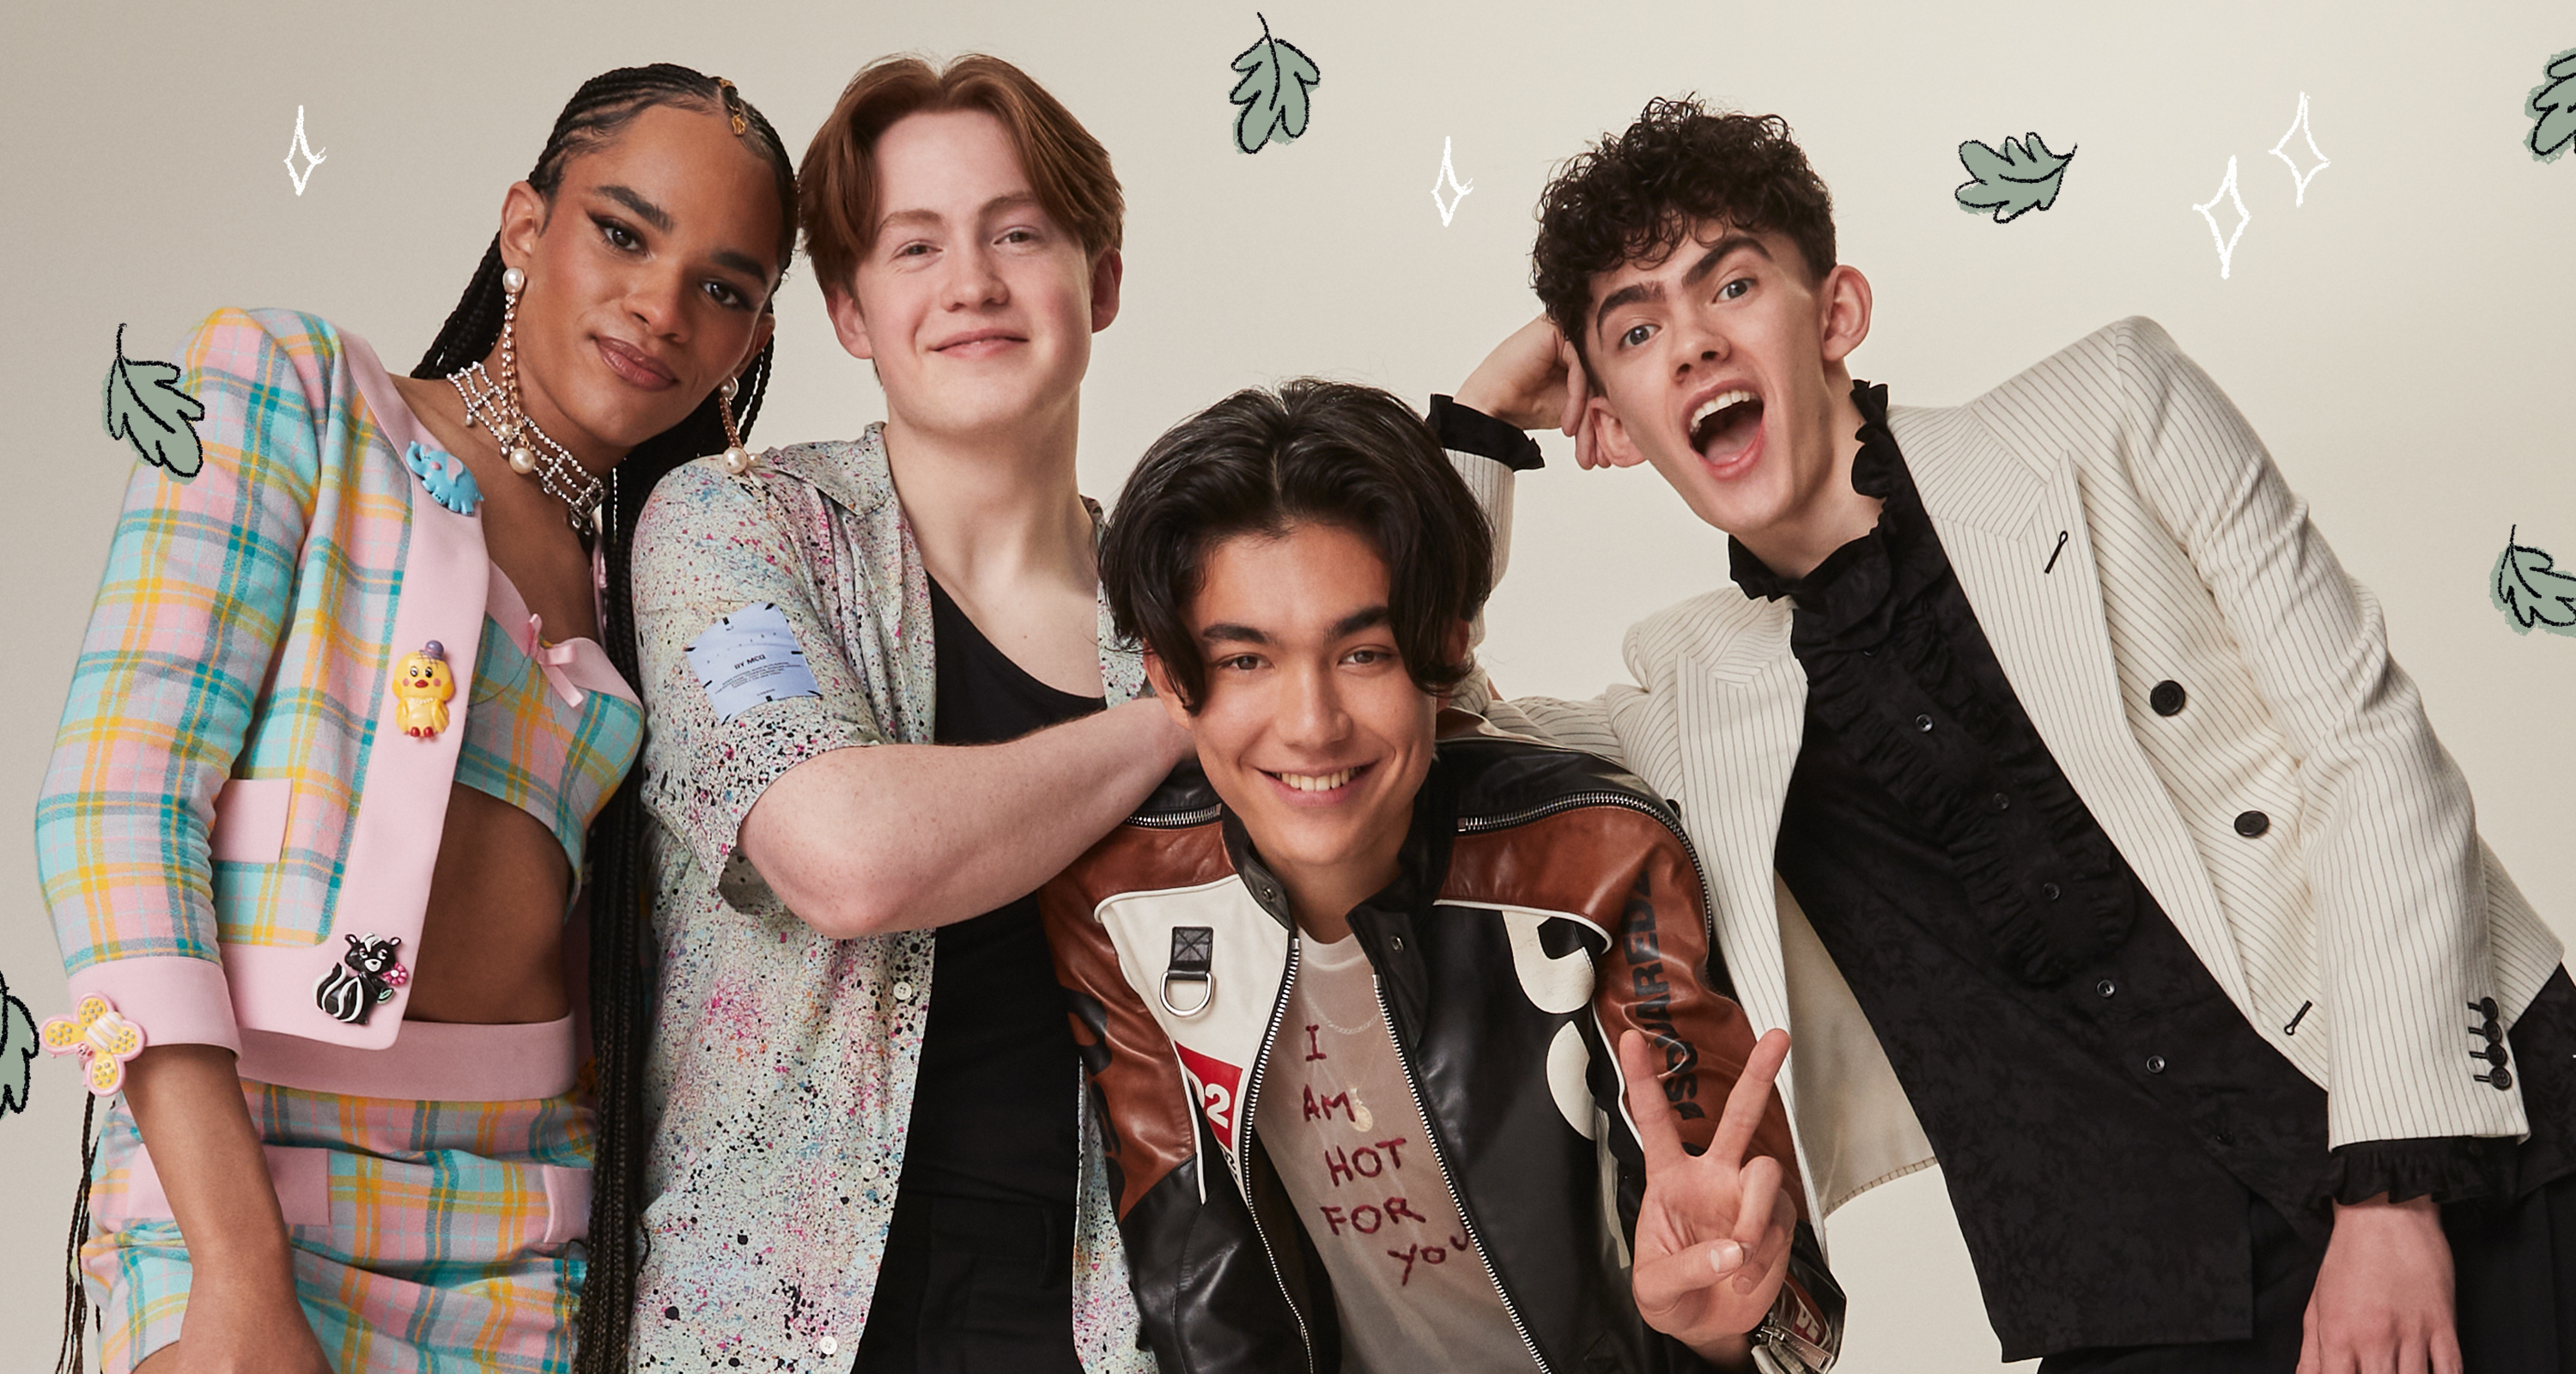 Heartstopper's young stars are ready to share the love in Netflix's most  uplifting LGBTQ series yet - Attitude